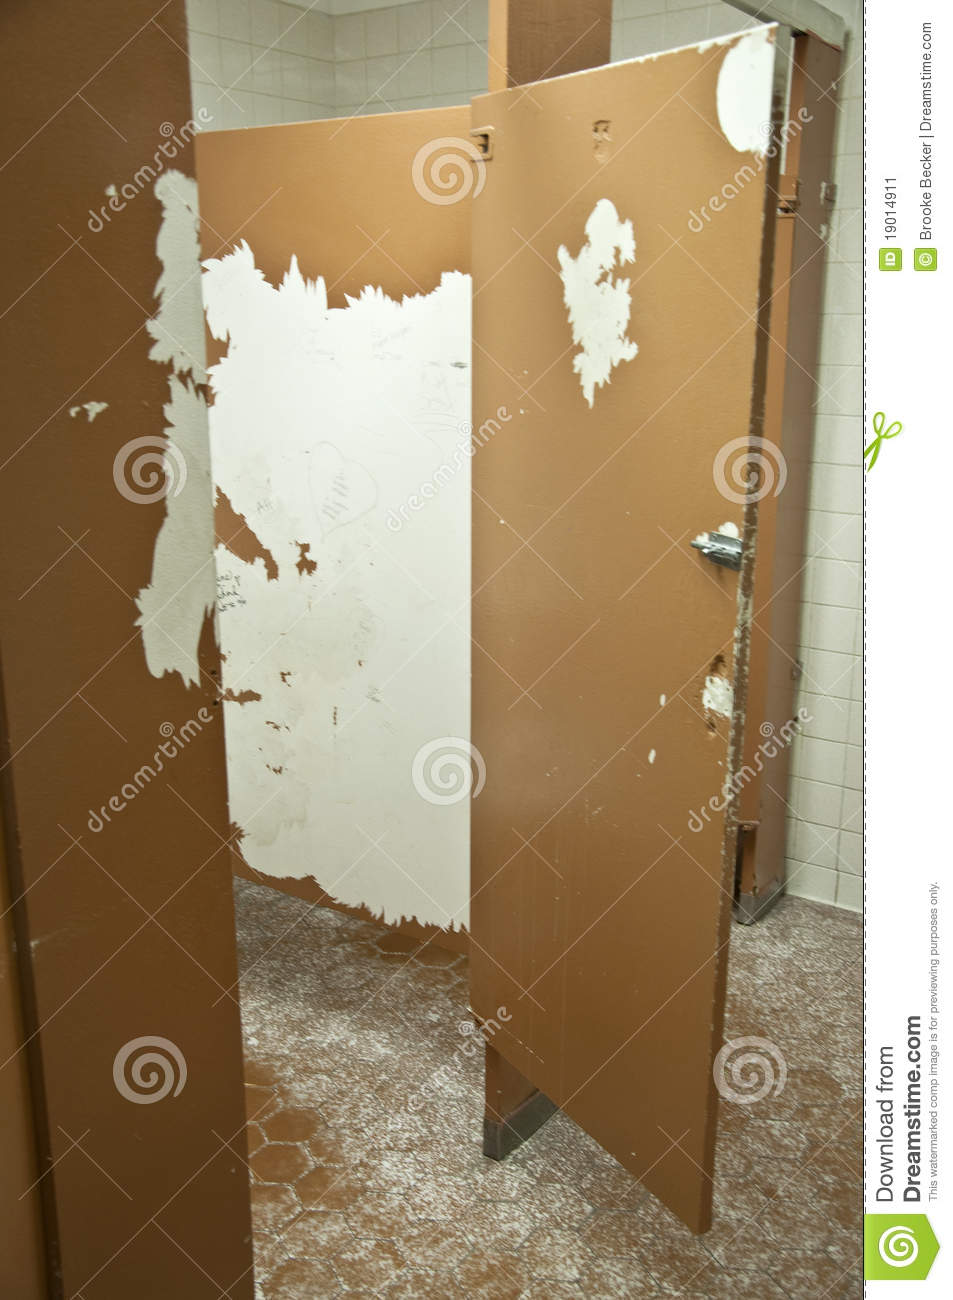 Public Restroom Stall Stock Image   Image  19014911